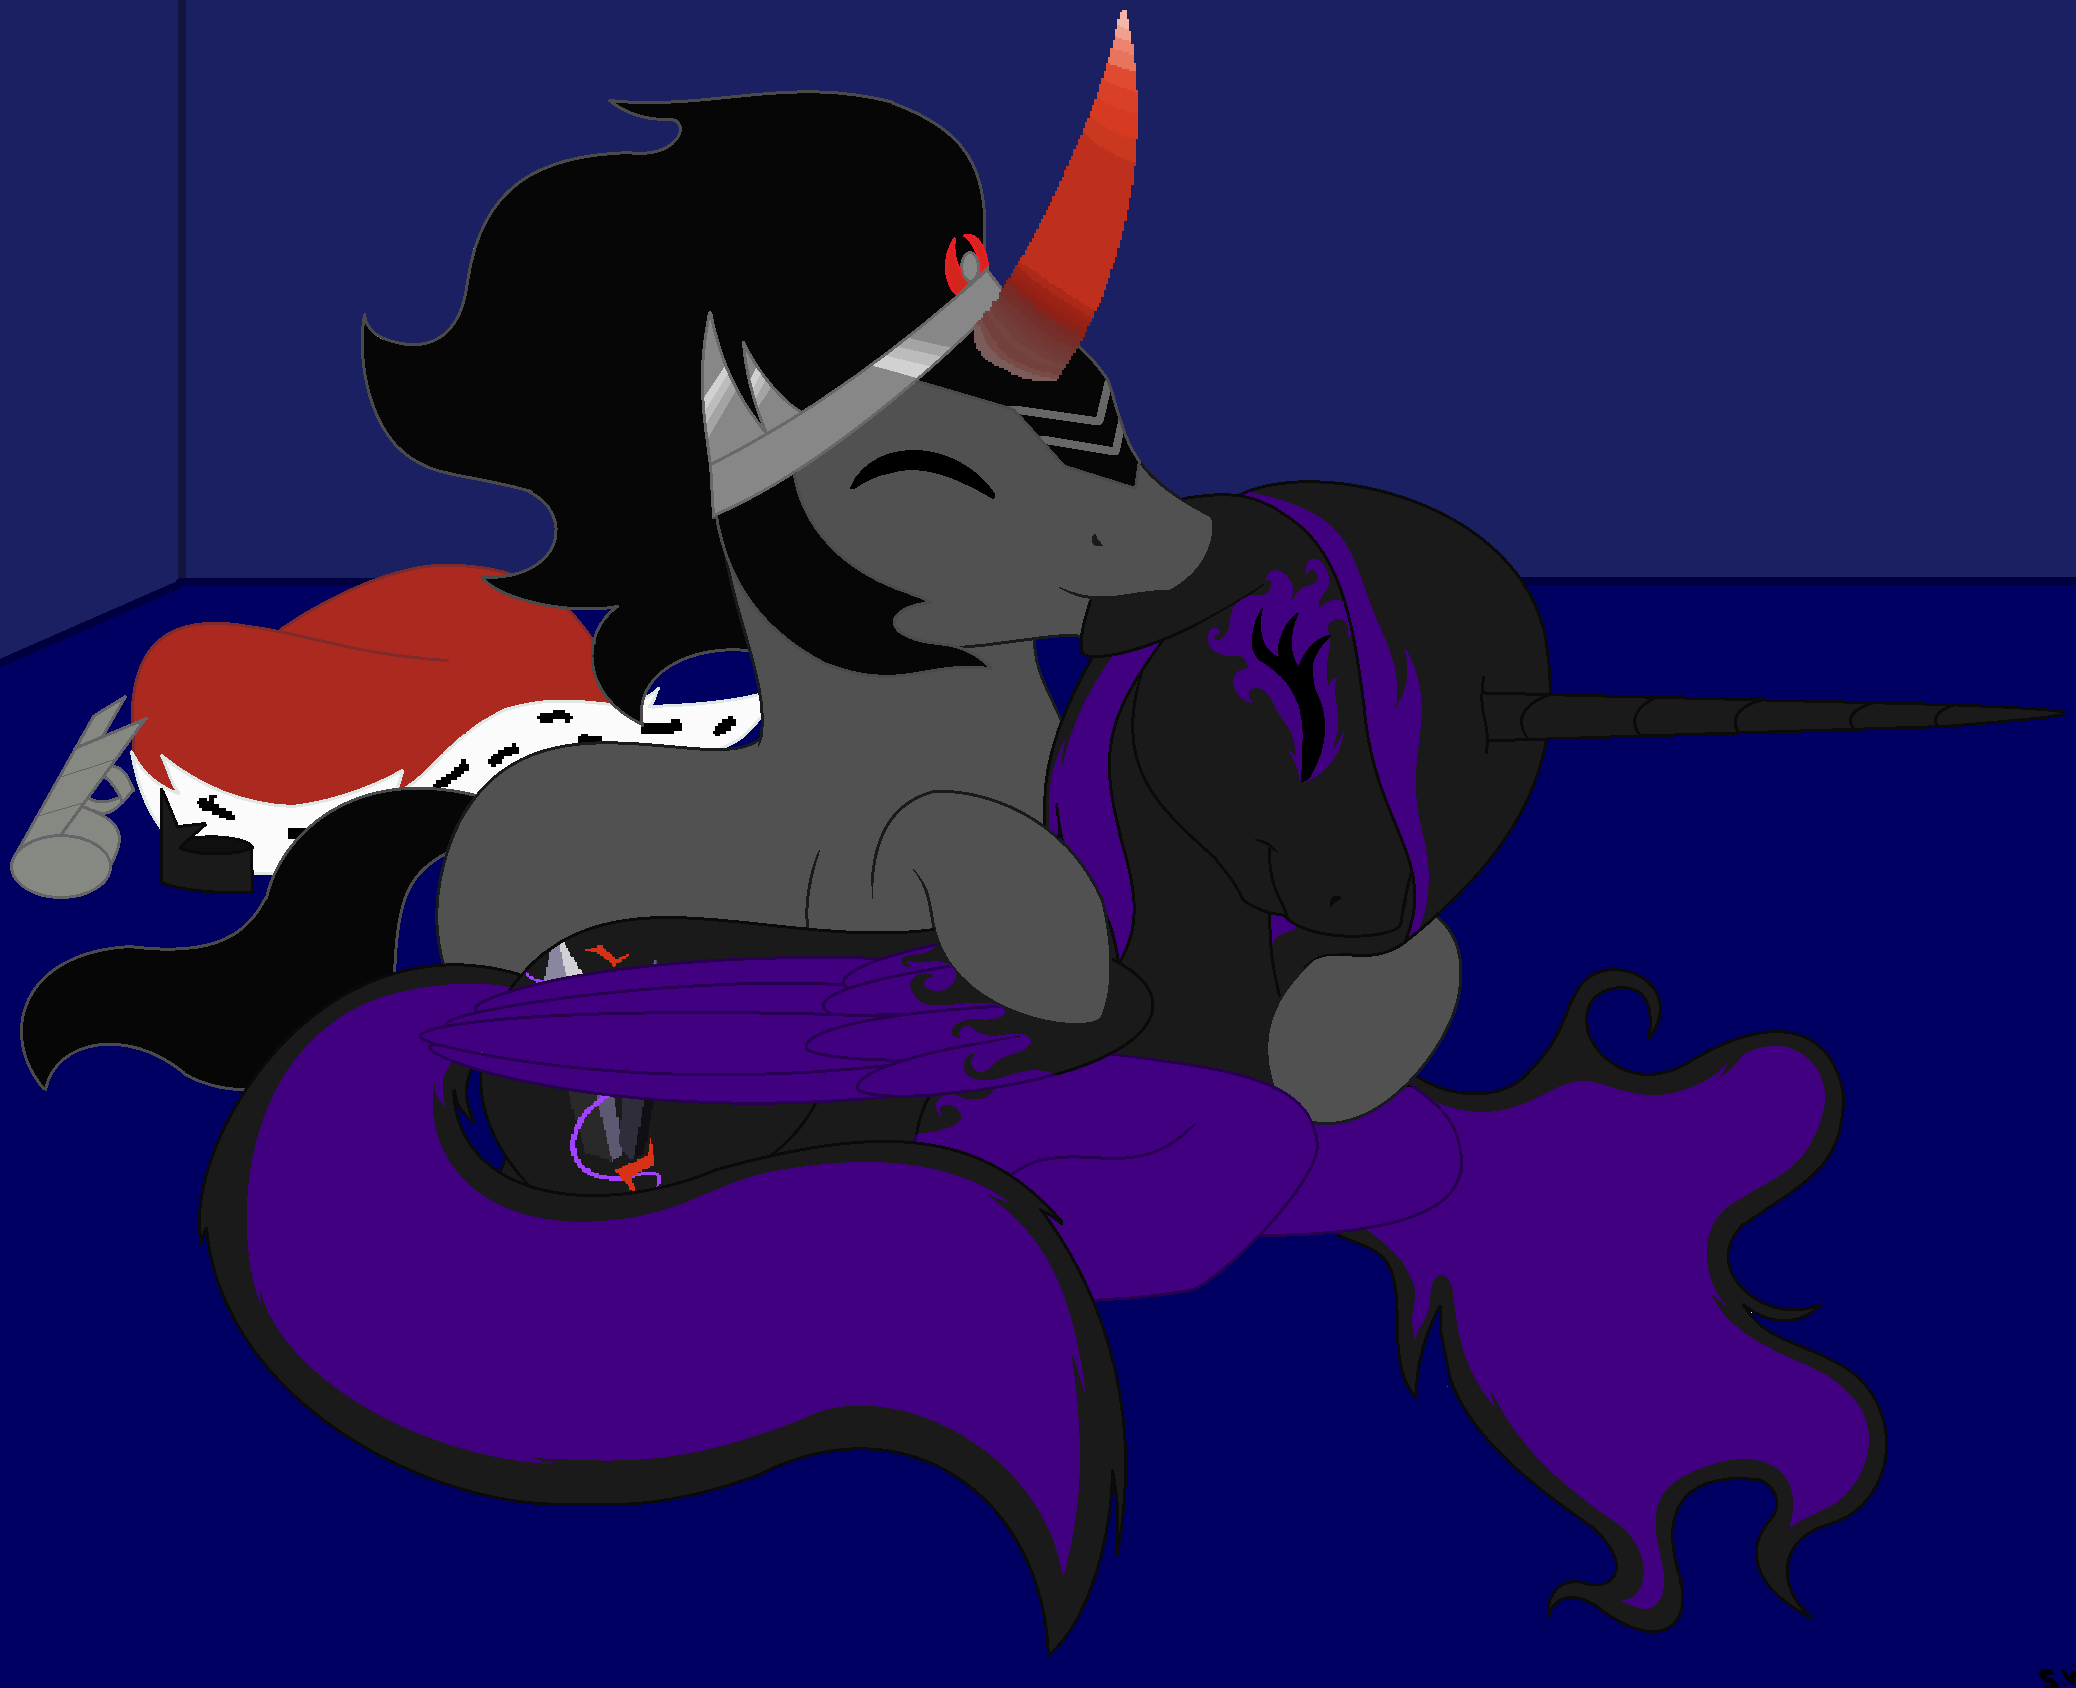 Lady Sinestra and King Sombra